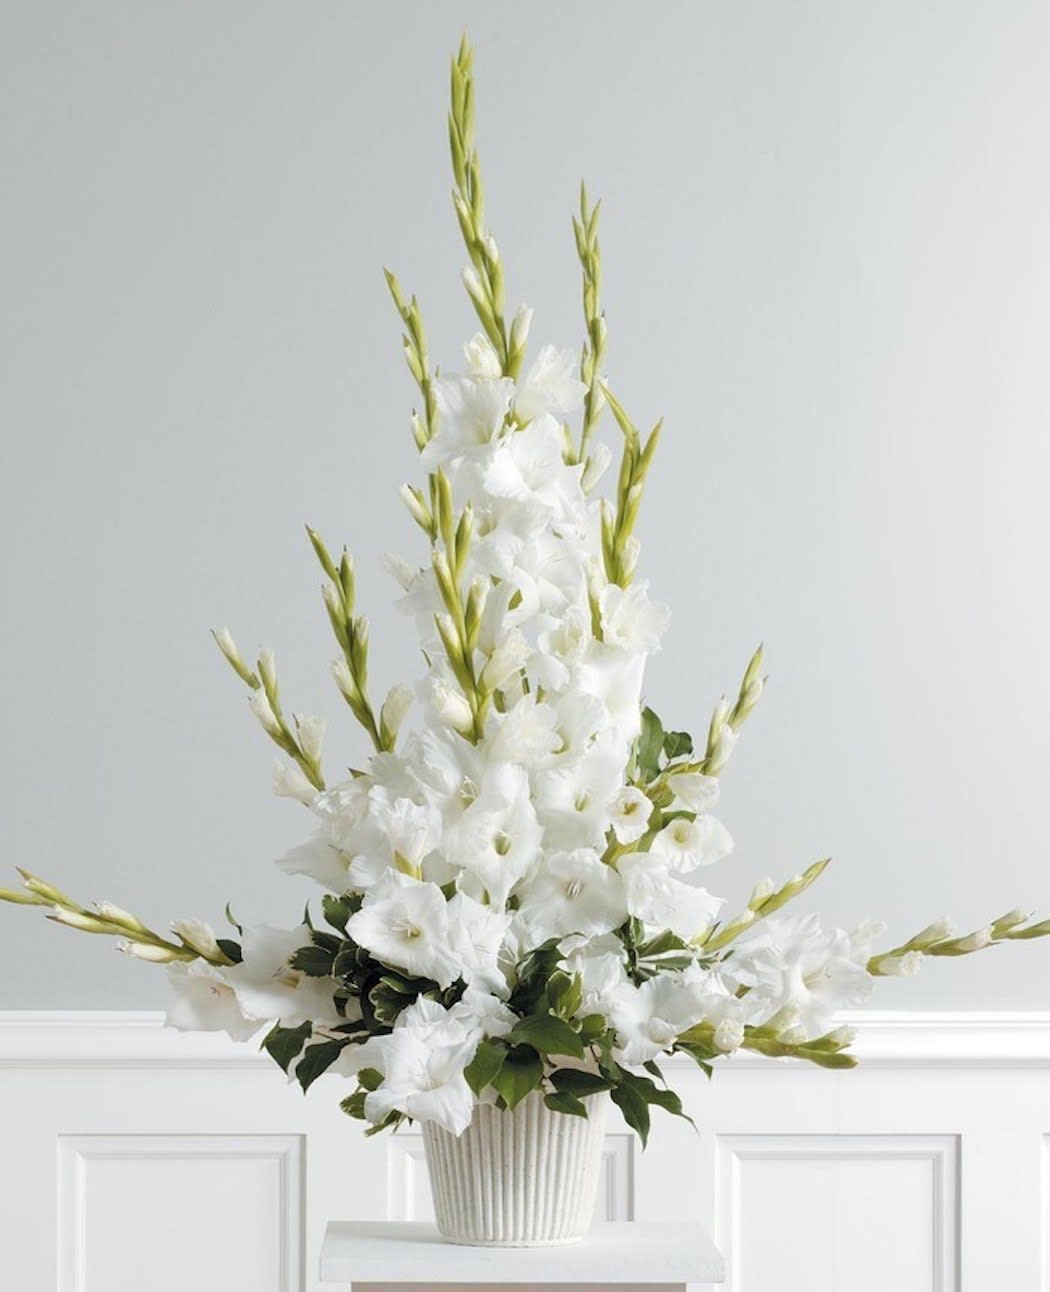 Gladiolus Essence - Urn spray filled with the beauty of gladiolus. Color options may be available. A towering display of select White Gladiolus offer a memorable funeral service or home offering